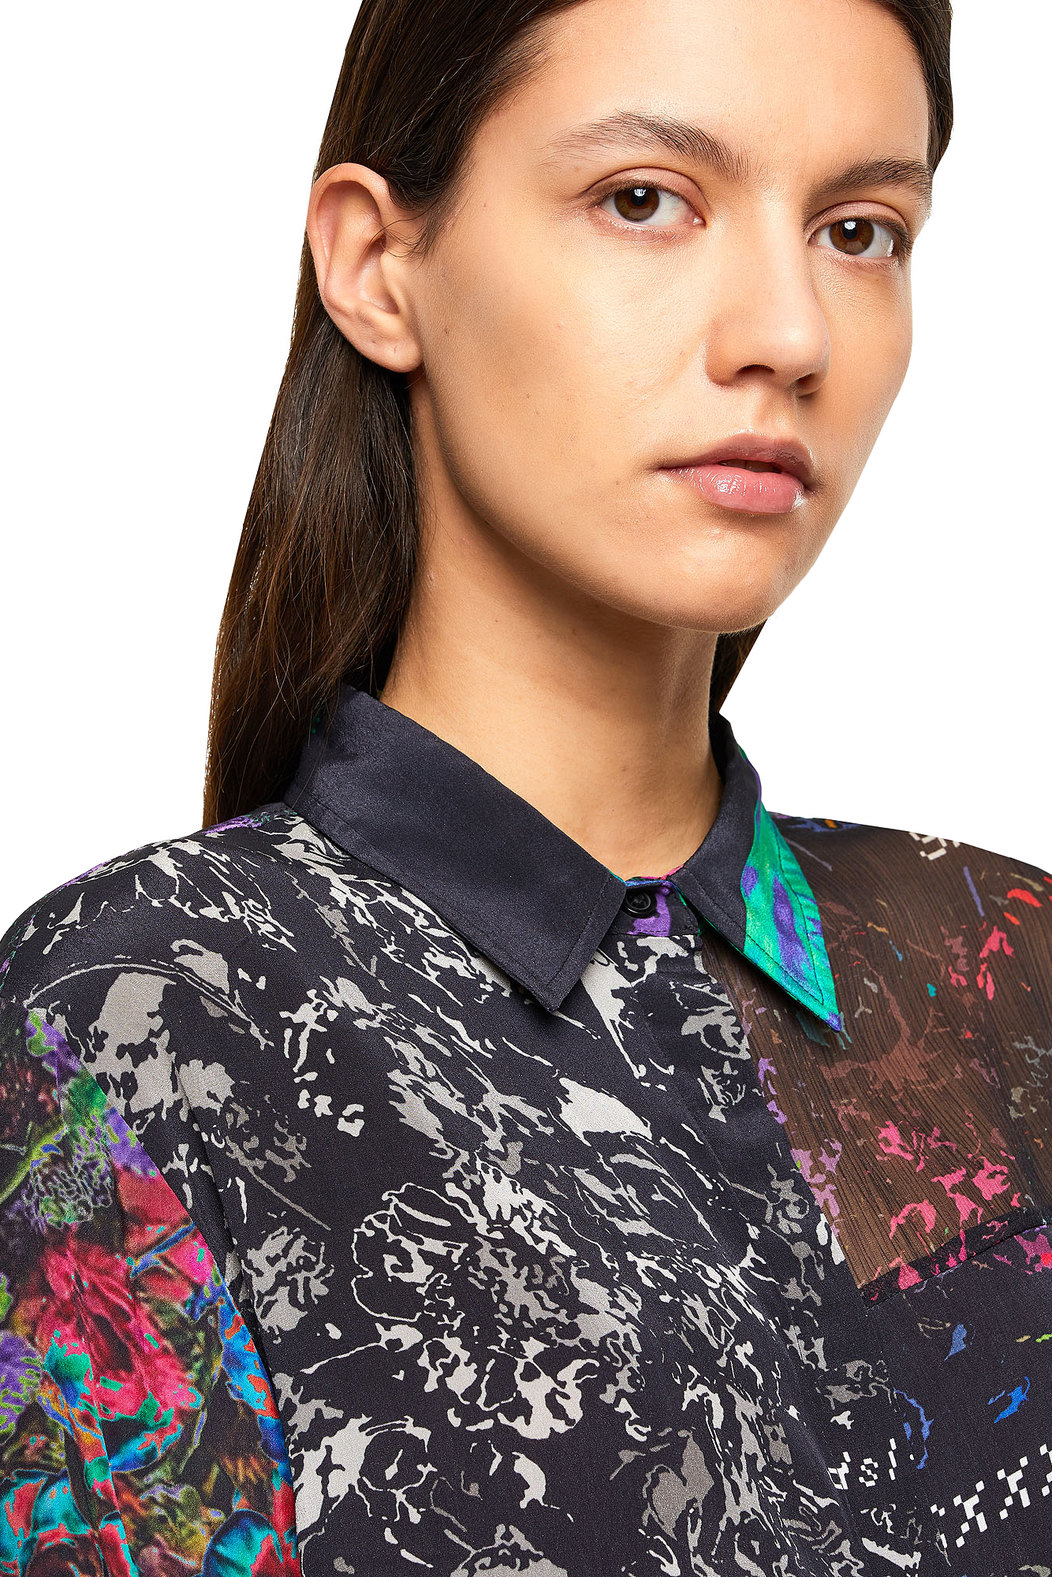 Printed shirt with patchwork design